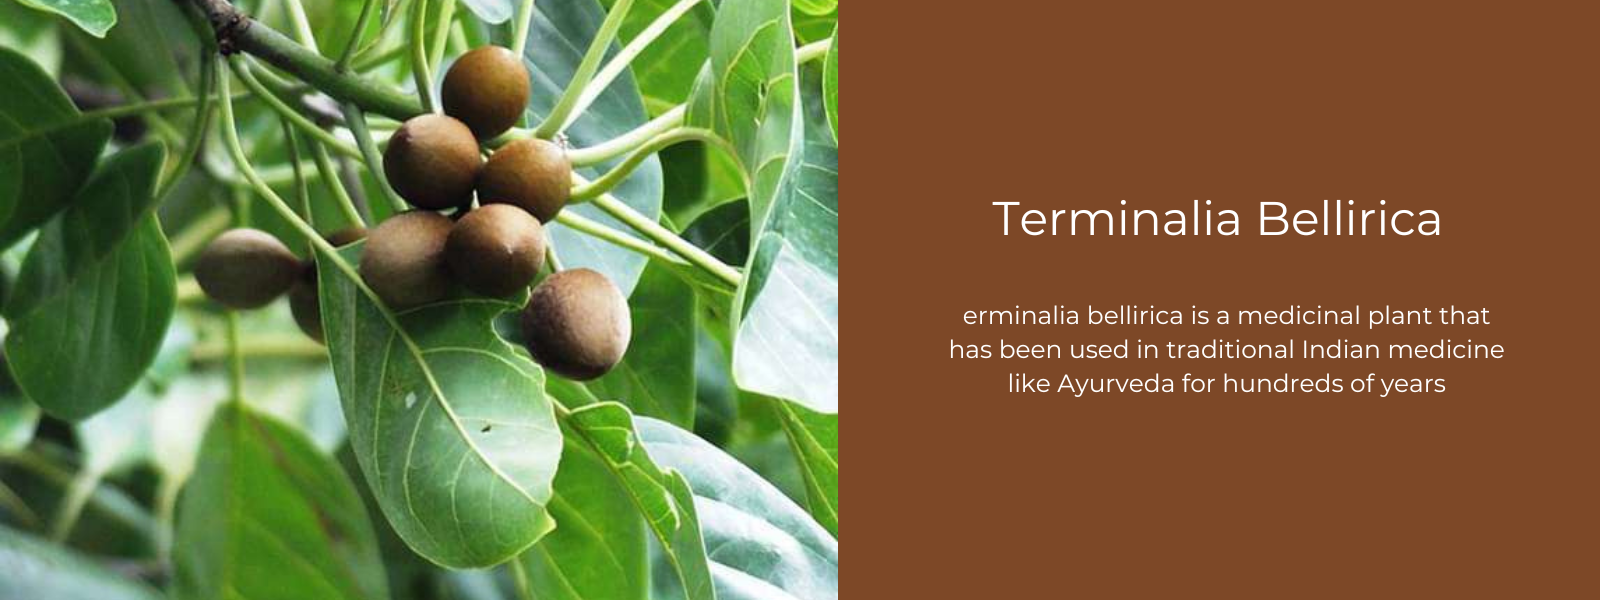 Terminalia Bellirica - Health Benefits, Uses and Important Facts